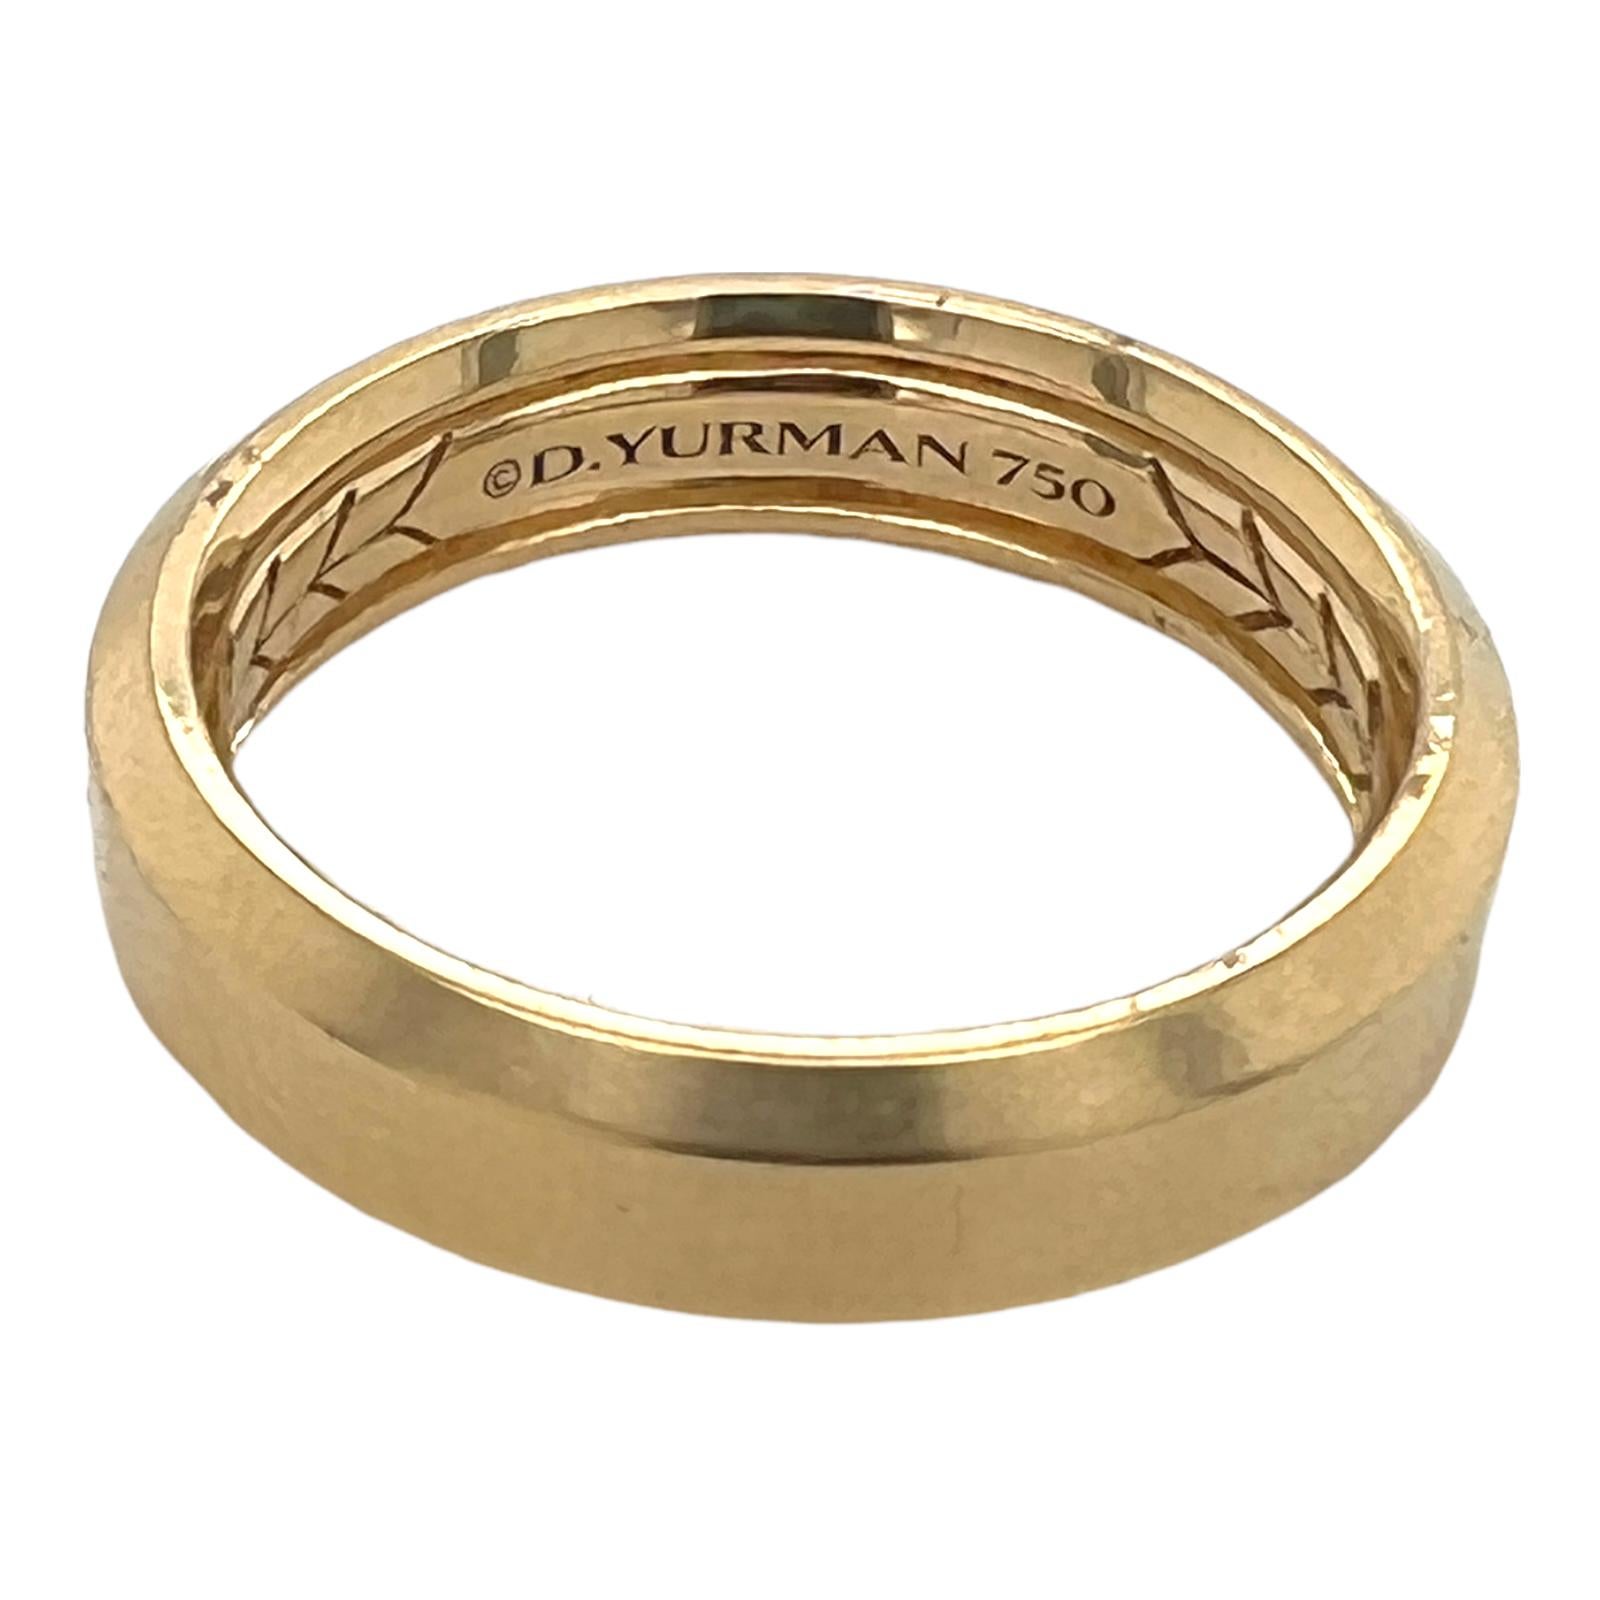 David Yurman Gents Wedding Band ring fashioned in 18 karat yellow gold. The beveled design is modern and clean. The band measures 6mm in width and is size 10. Signed D. Yurman 750. 

MSRP: $2,100.00